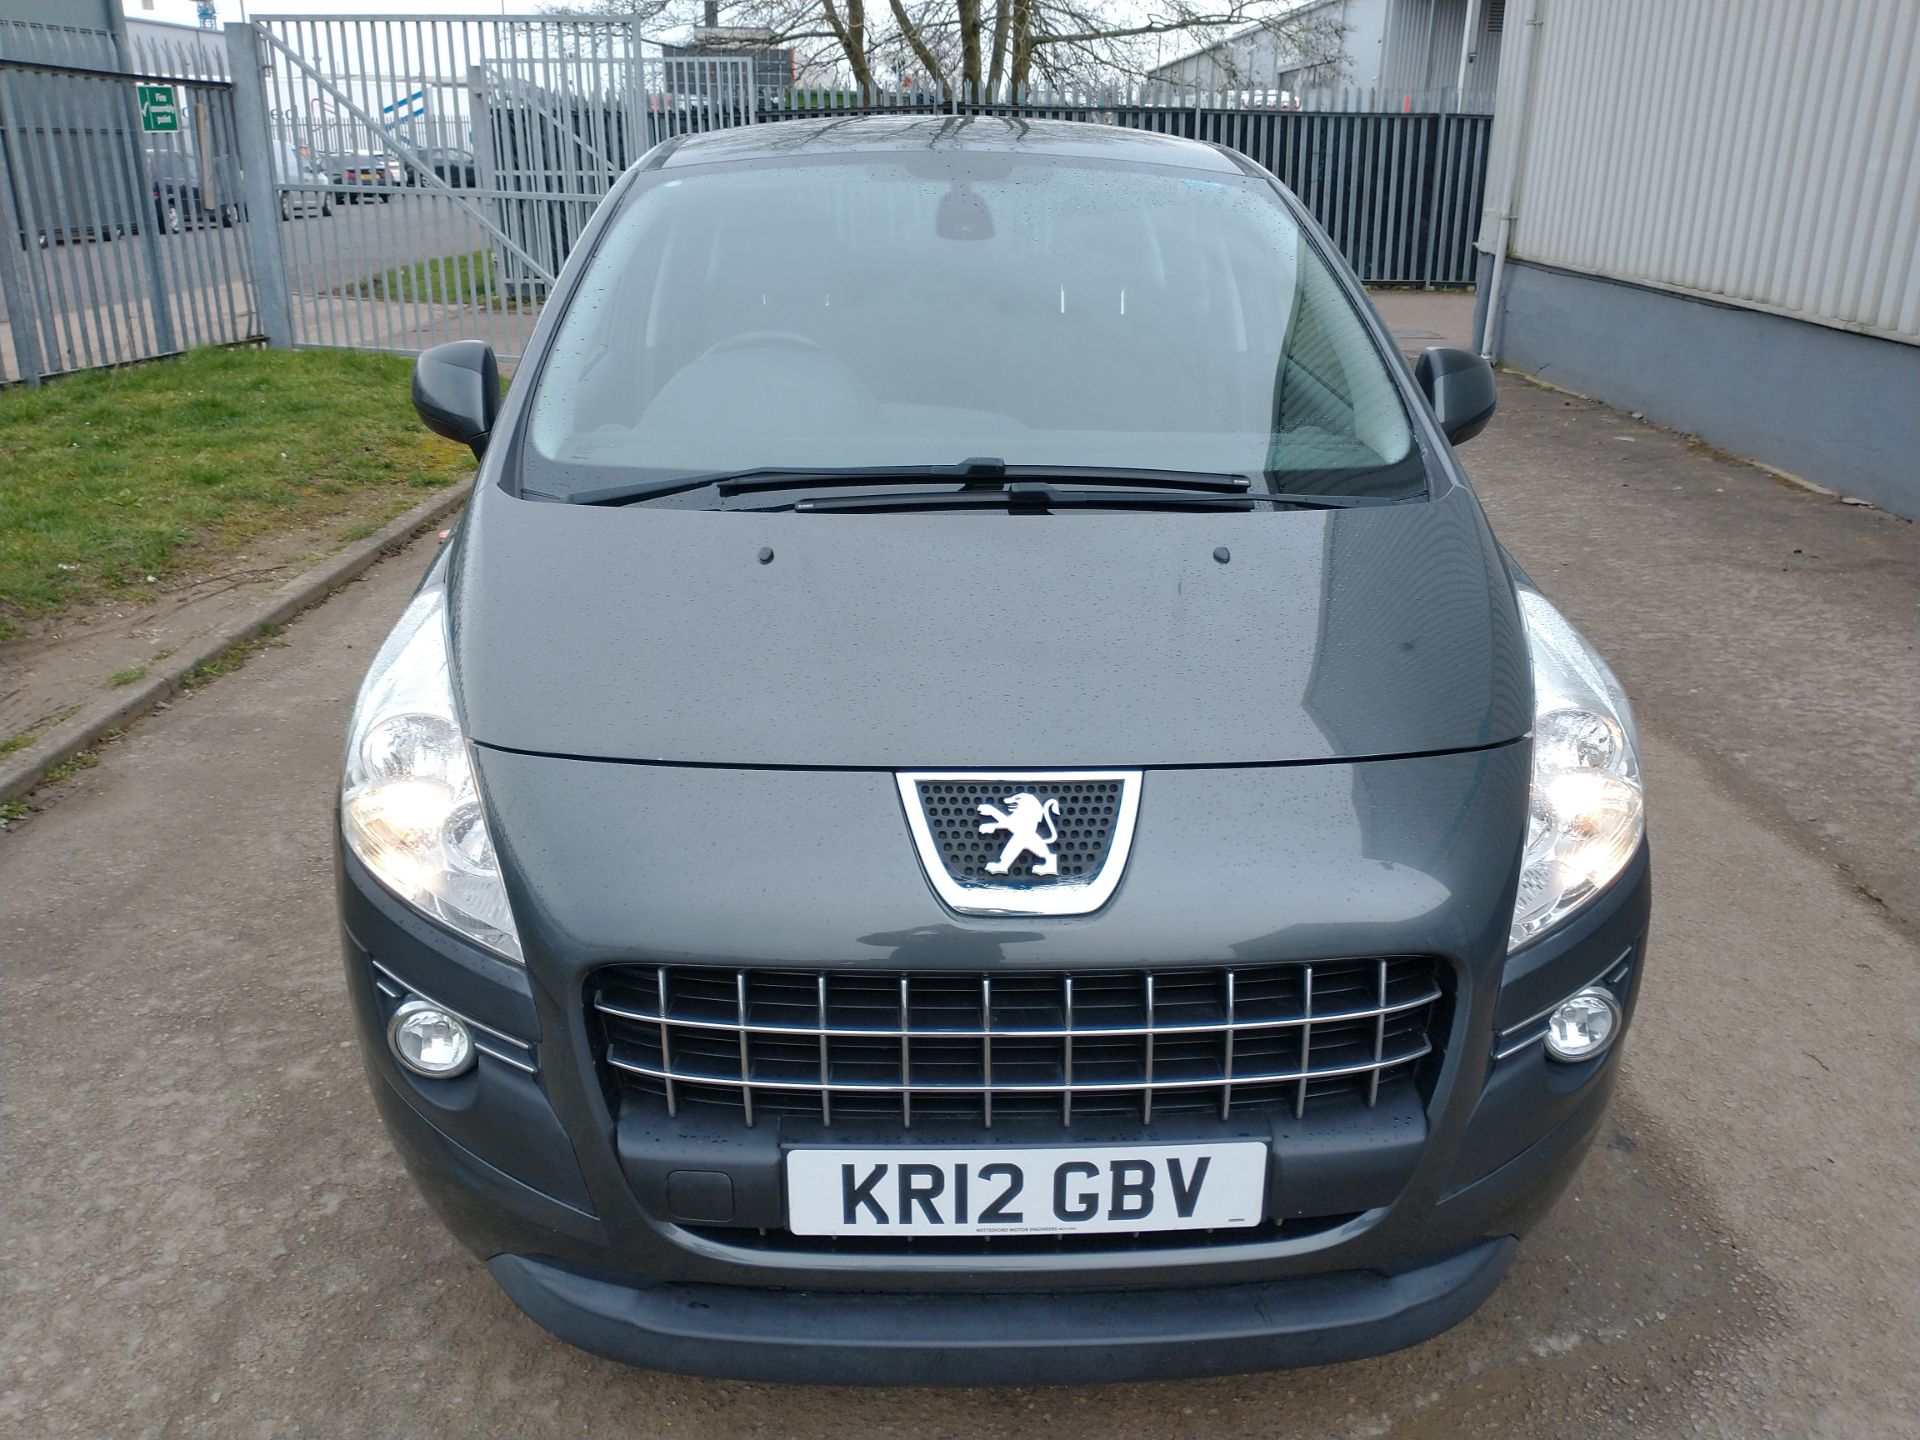 2012 Peugeot 3008 Active HDI 1.6 5DR SUV - CL505 - NO VAT ON THE HAMM - Image 12 of 19